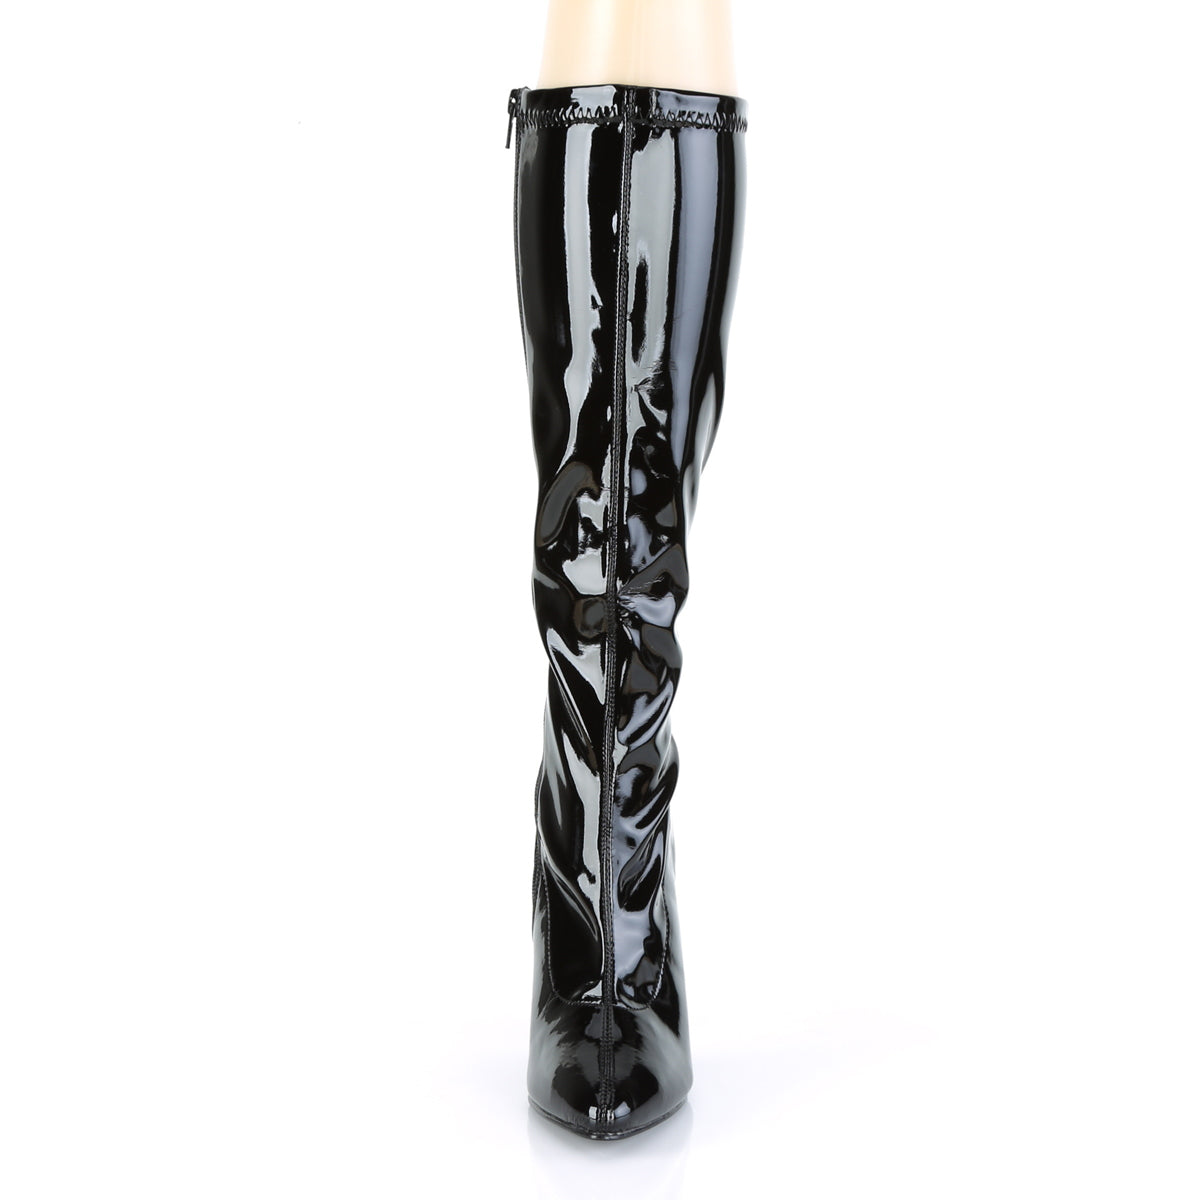 SEDUCE-2000/B 5" PLEASER FAST DELIVERY 24-48h